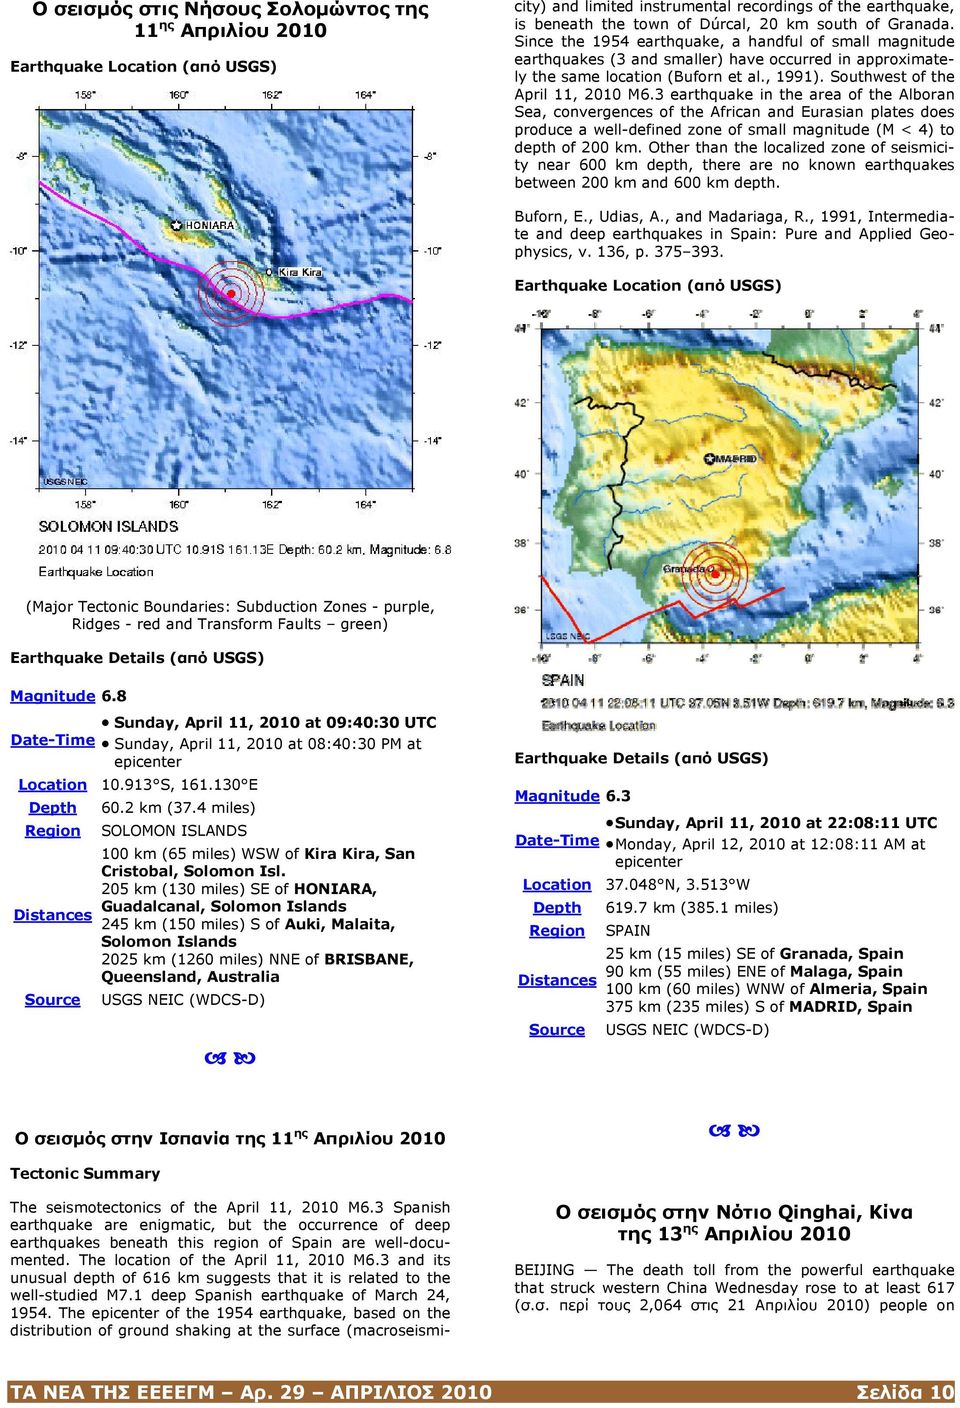 3 and its unusual depth of 616 km suggests that it is related to the well-studied M7.1 deep Spanish earthquake of March 24, 1954.